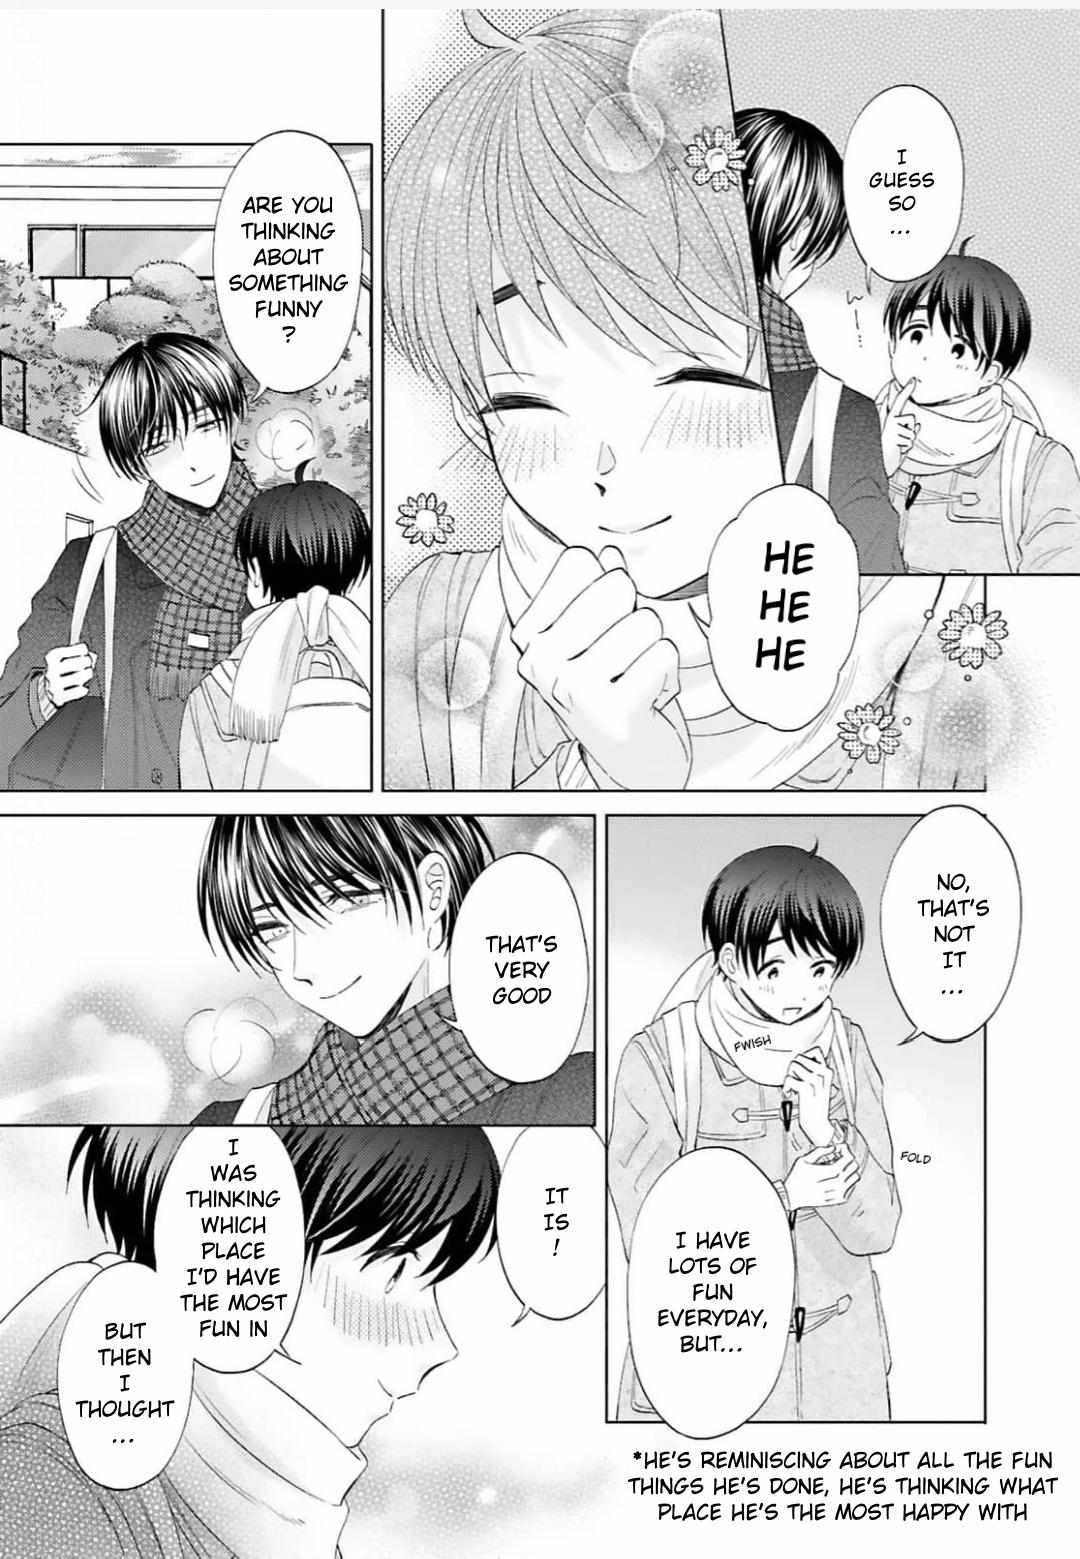 My Cutie Pie -An Ordinary Boy And His Gorgeous Childhood Friend- 〘Official〙 - 10 page 7-e64e3b96